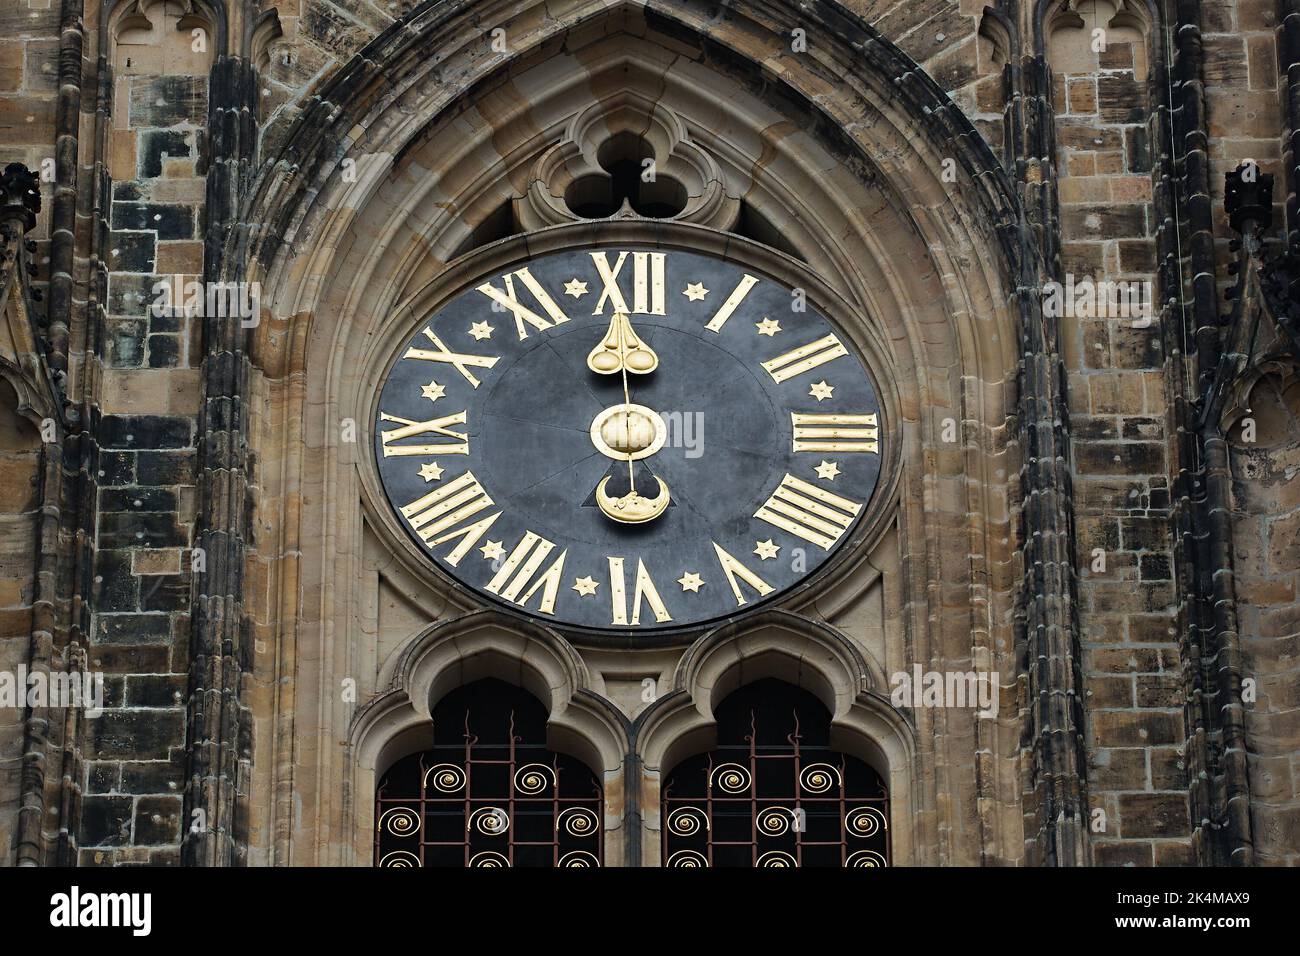 Old clock on a tower Stock Photo